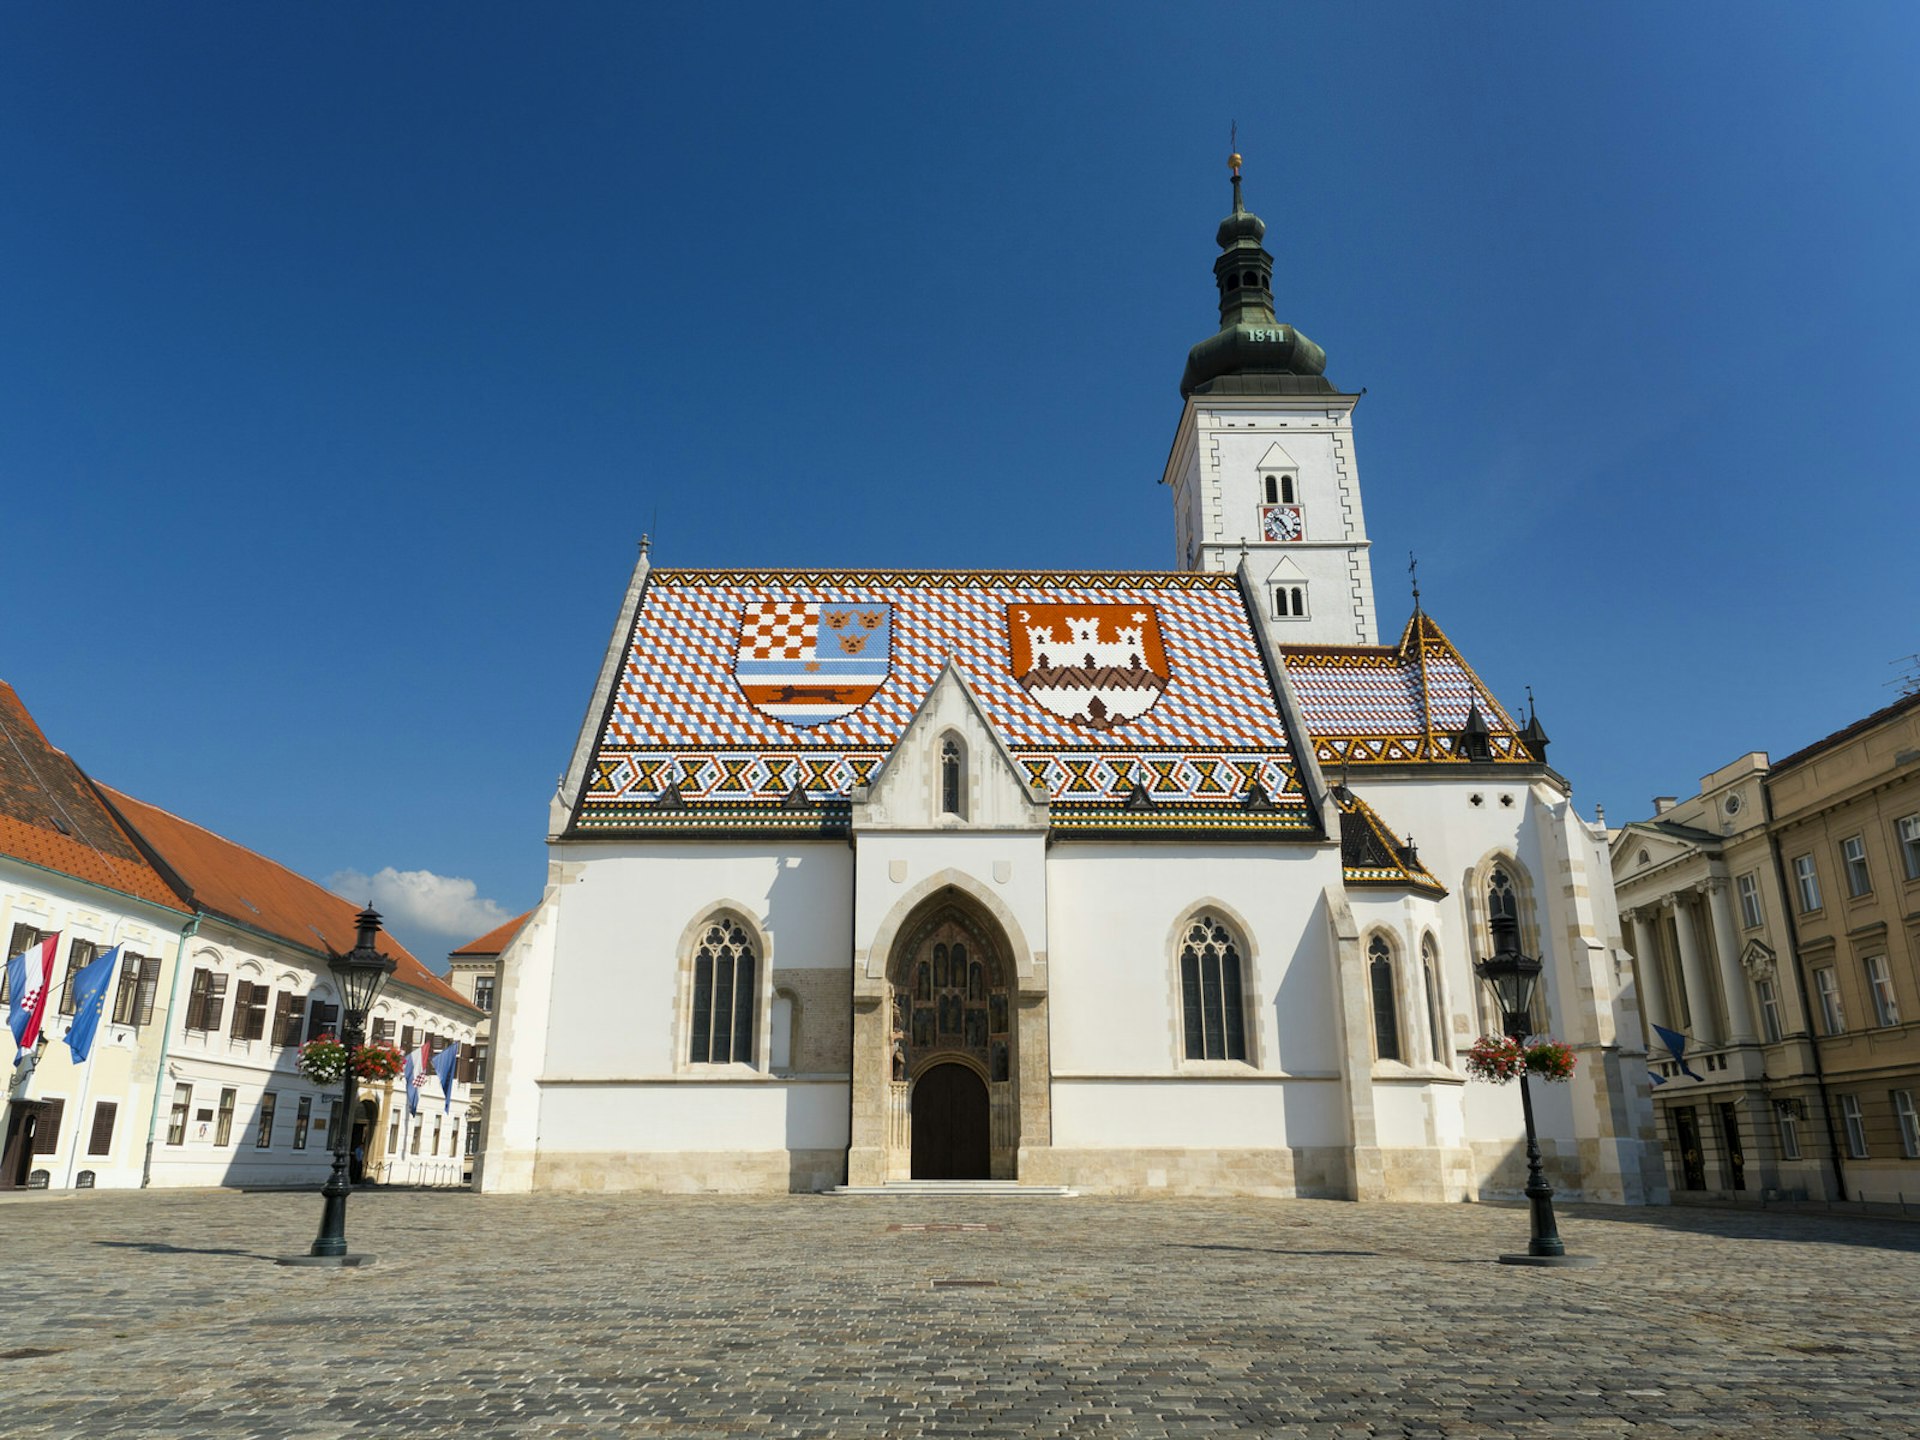 St Mark's Church is one of the prettiest building's in Zagreb's Upper Town